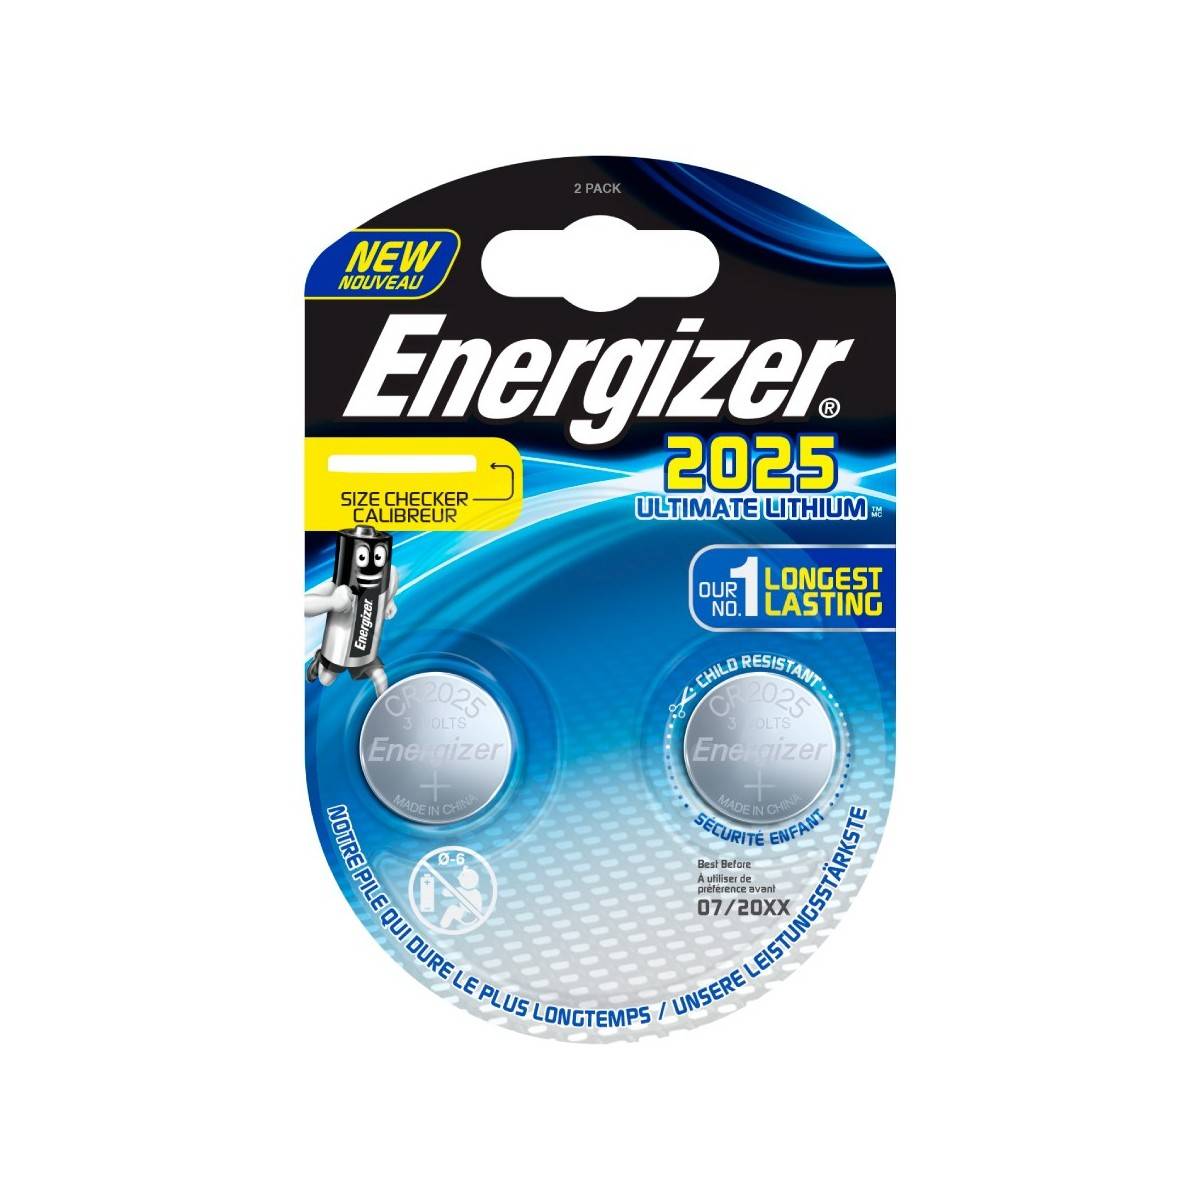 Energizer CR2025 Lithium Performance Battery, Blister of 2 pcs.